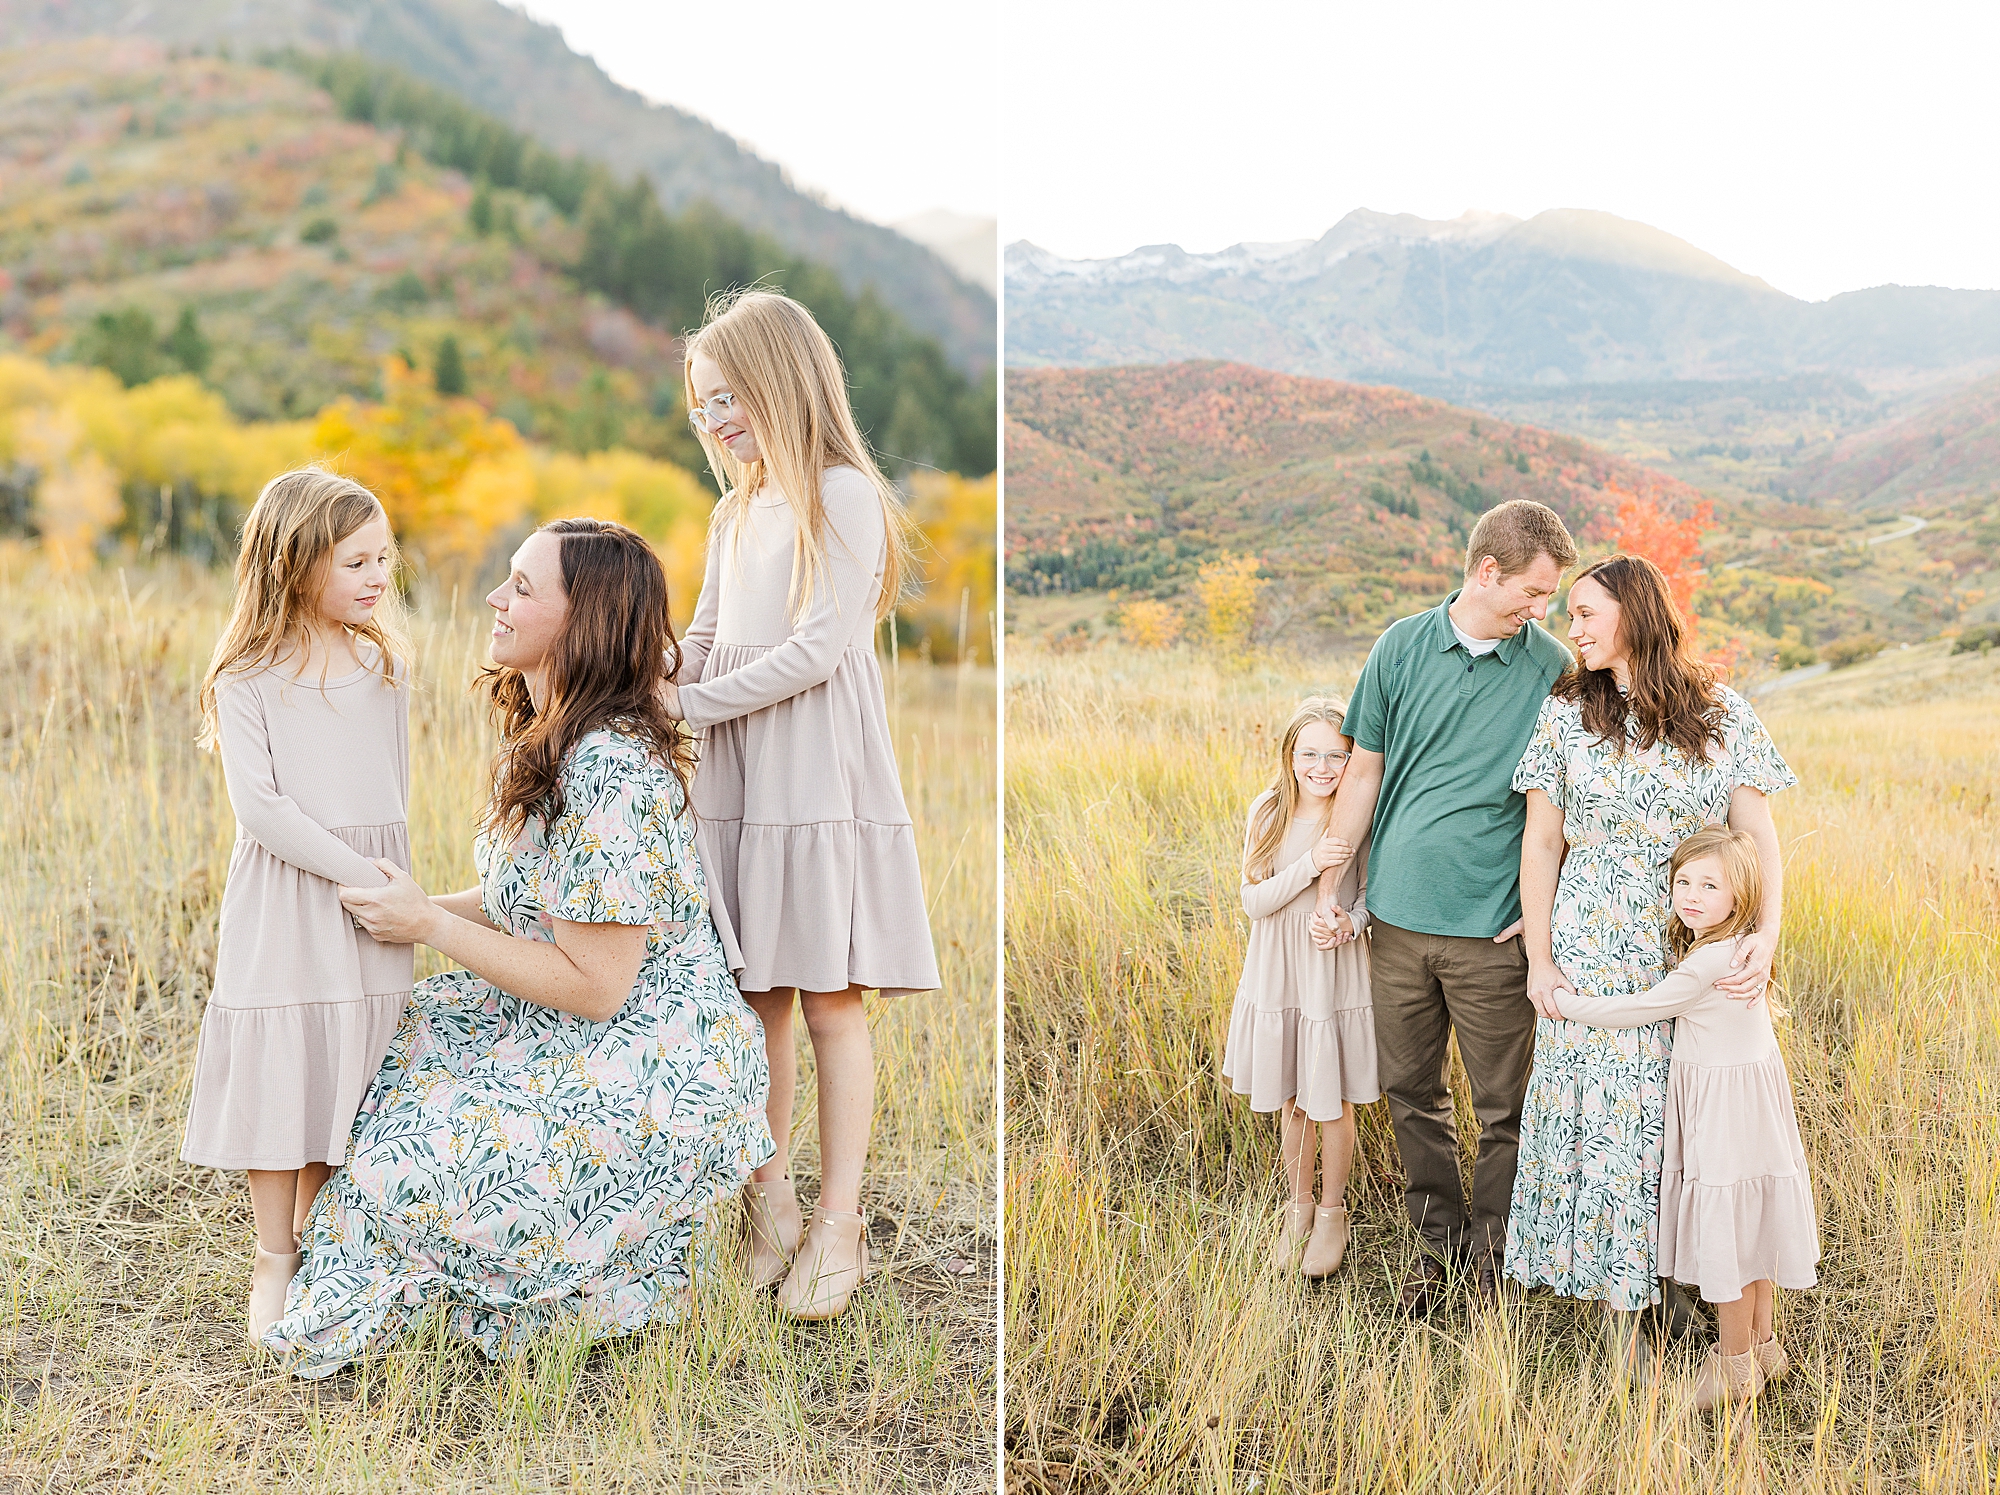 Warm family moment with vibrant Snow Basin valley backdrop.